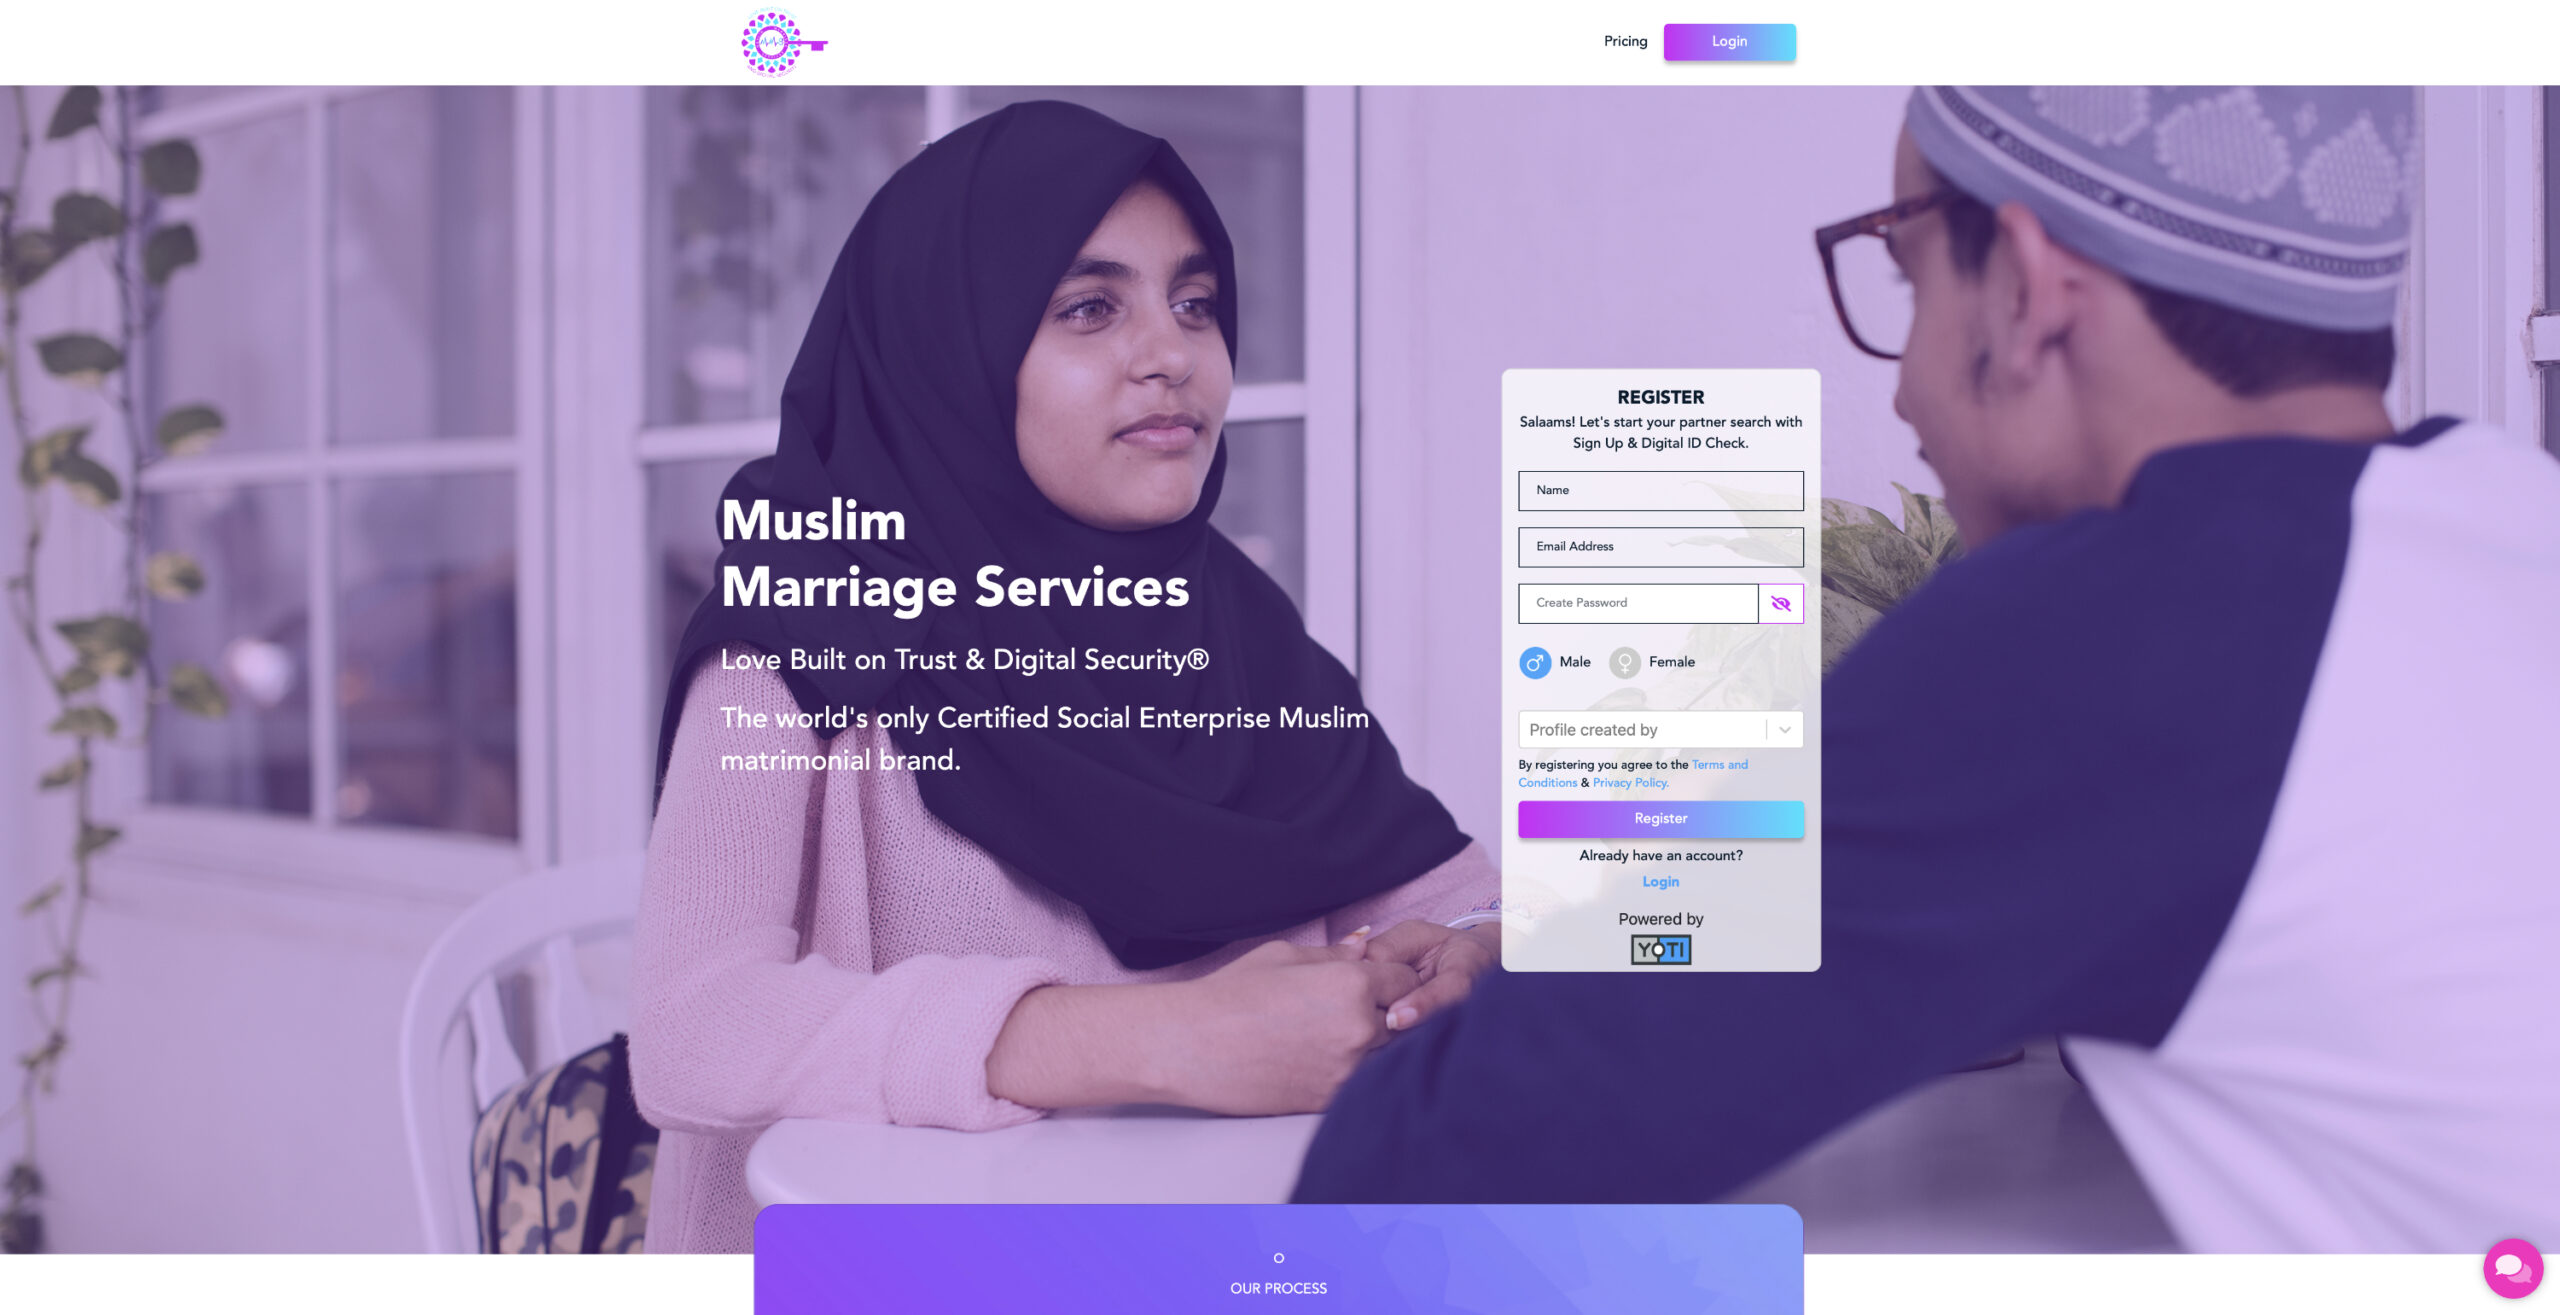 Airport Tech – A Solution for the Muslim Marriage Crisis?